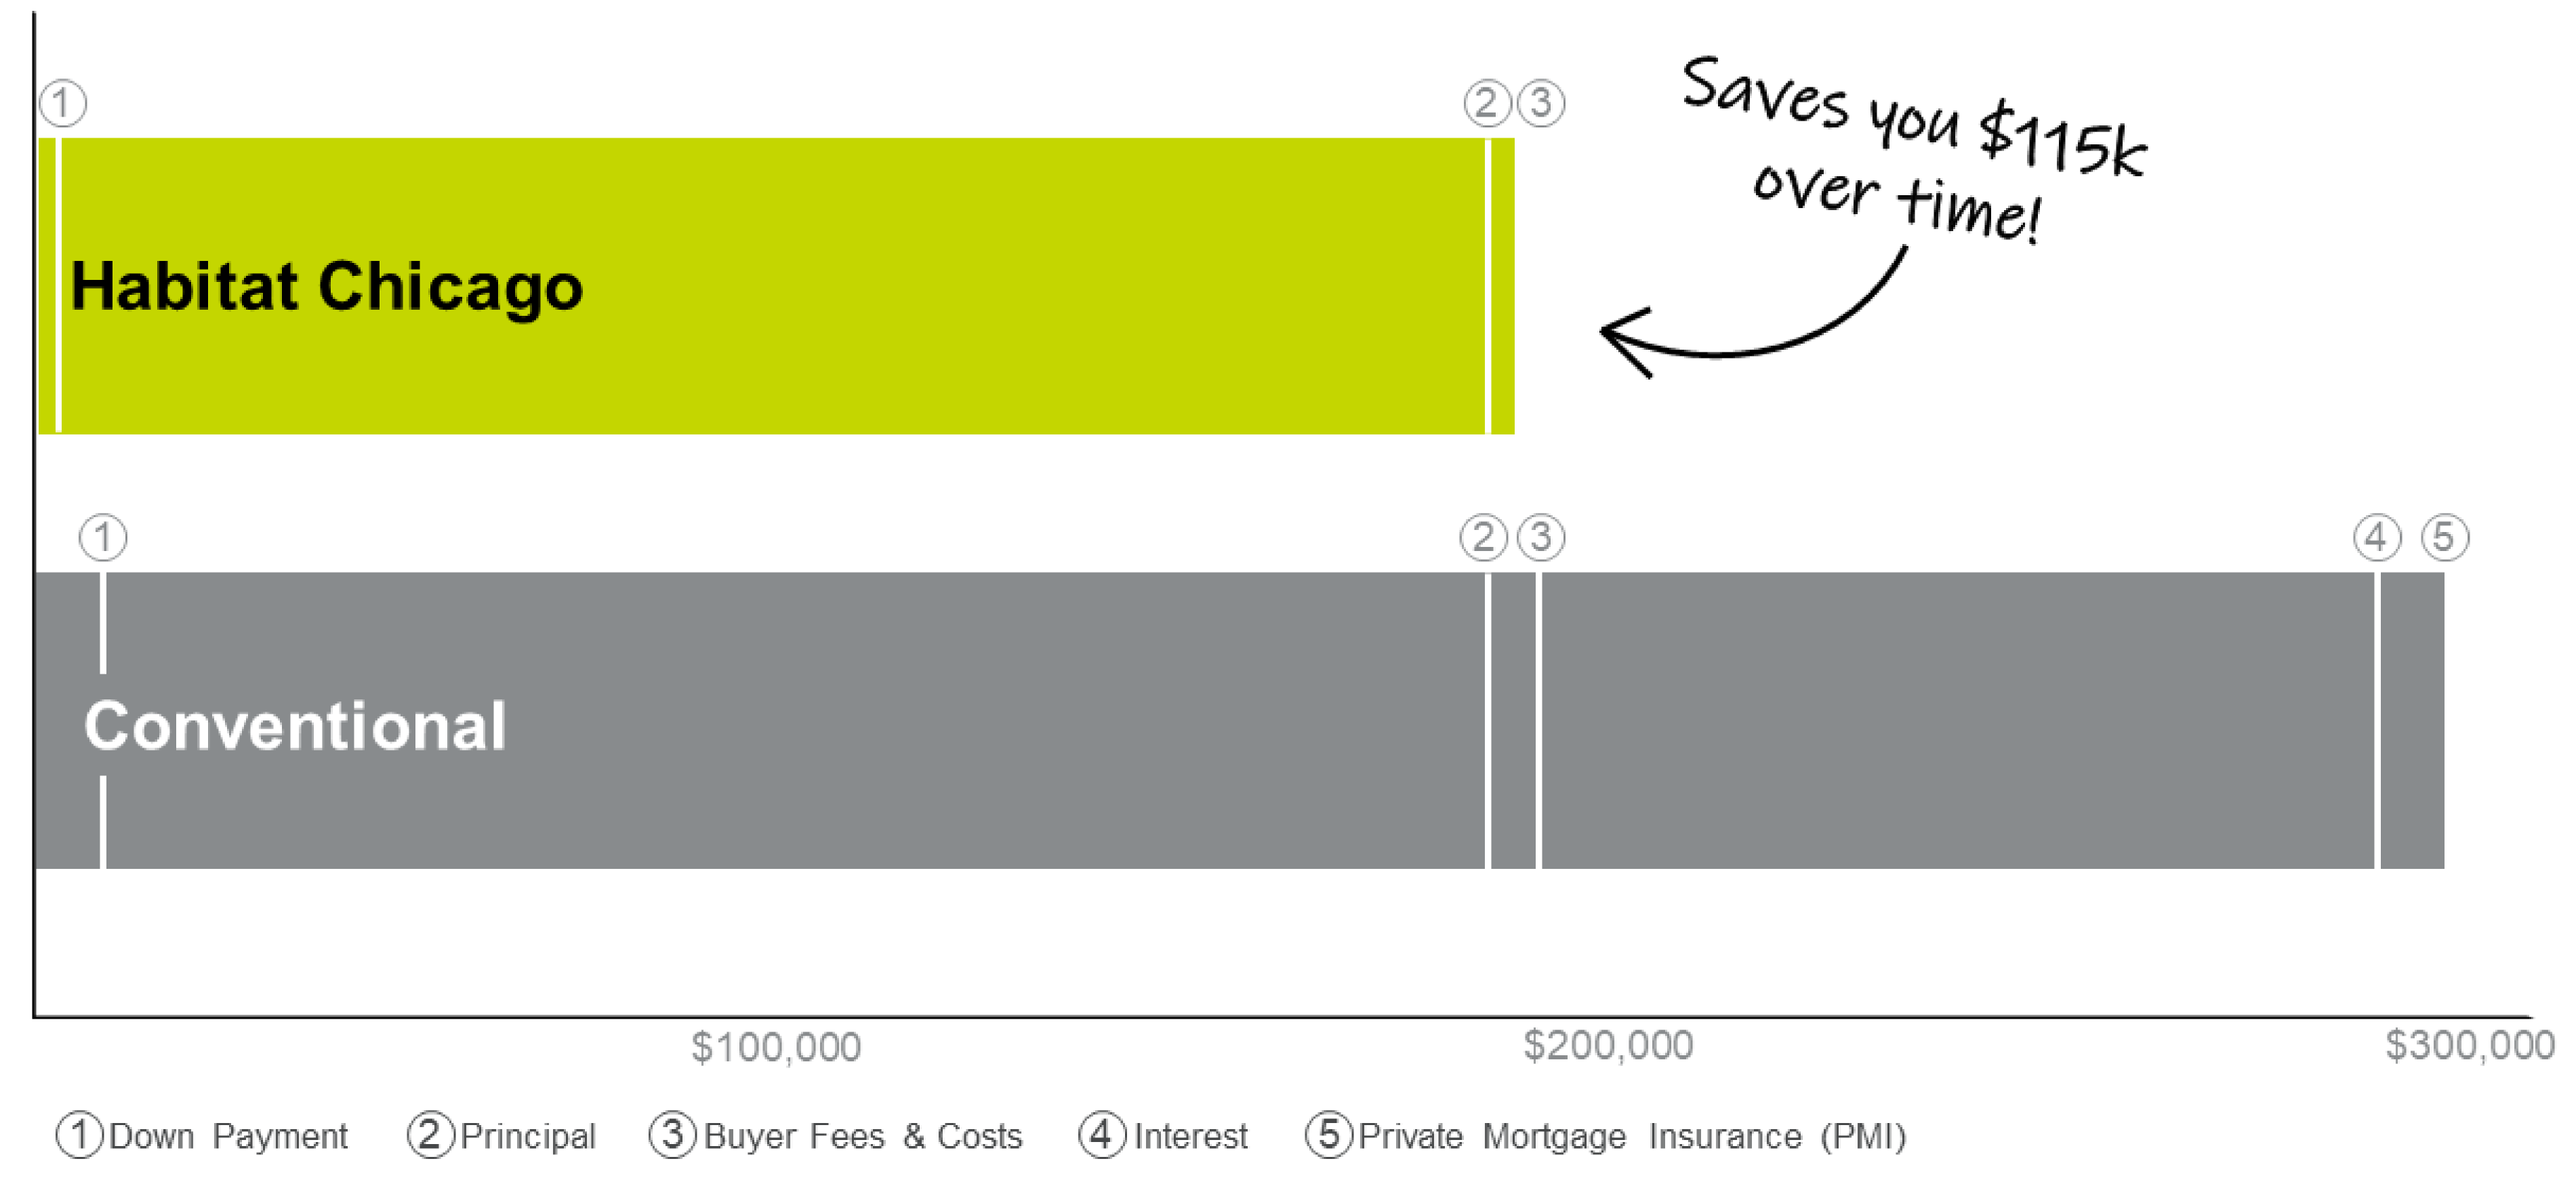 Loan comparison chart showing the cost savings of a Habitat Chicago loan